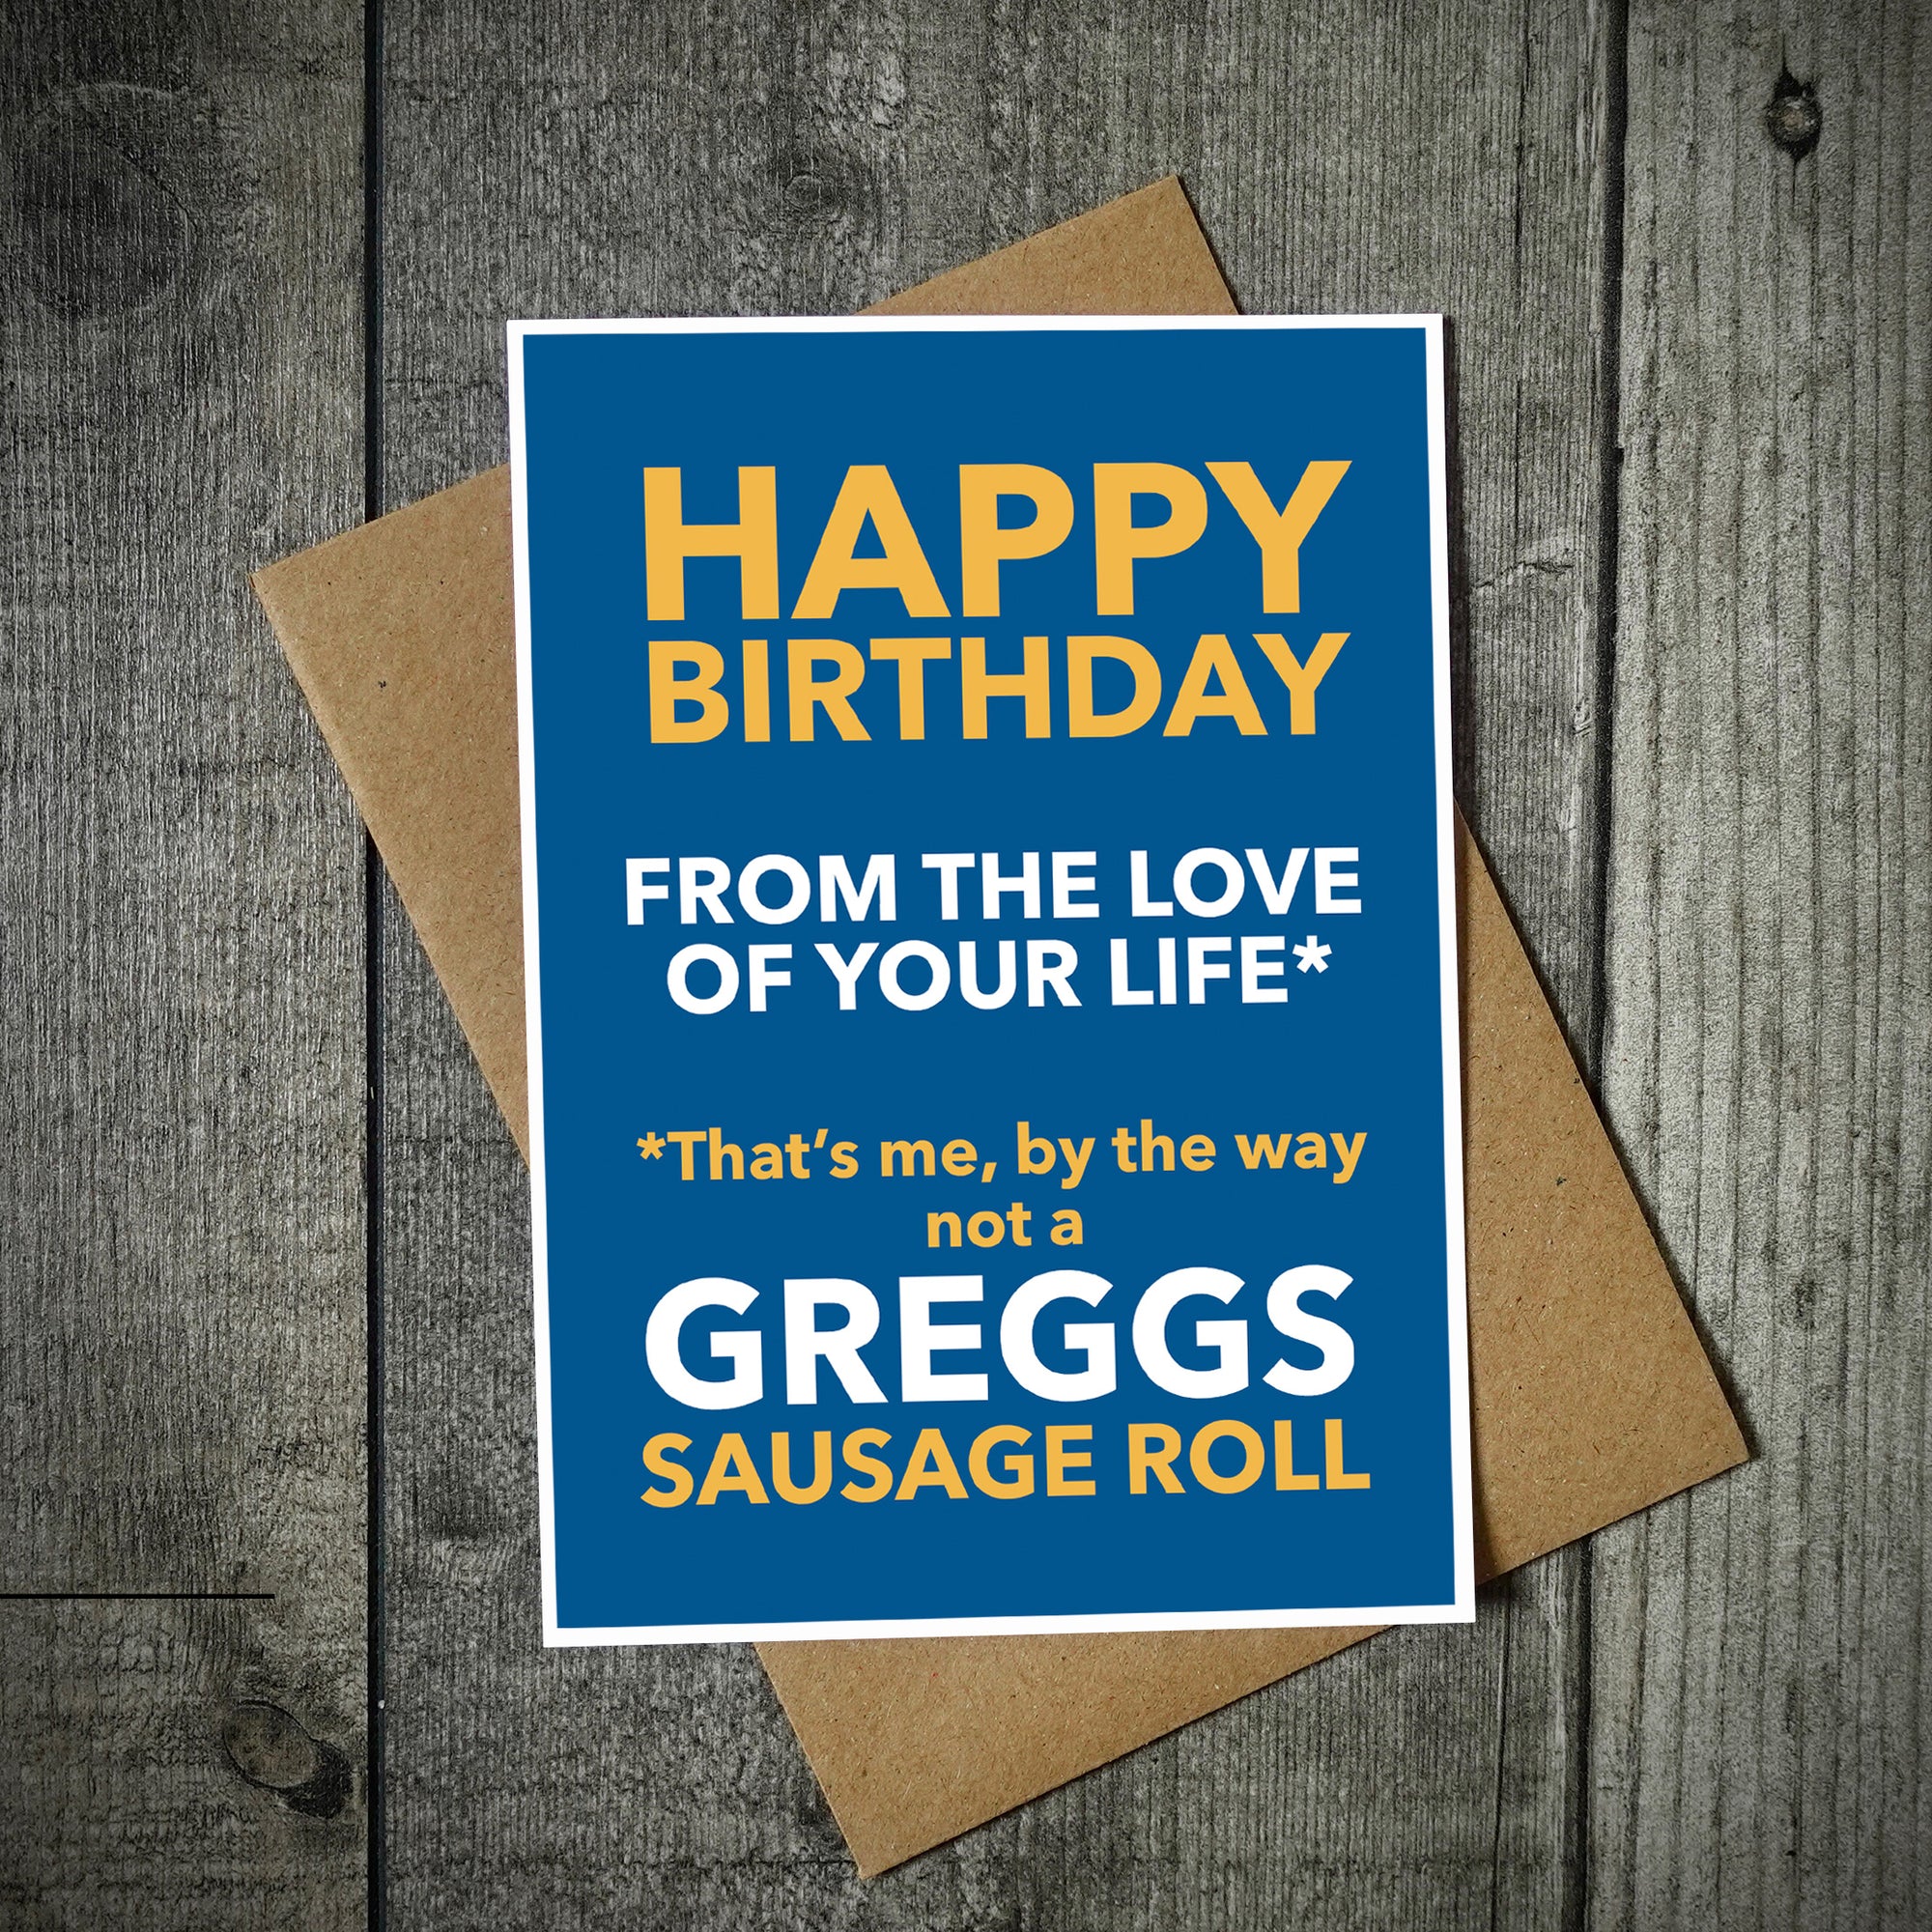 Happy Birthday From The Love Of Your Life Greggs Sausage Roll Birthday Card